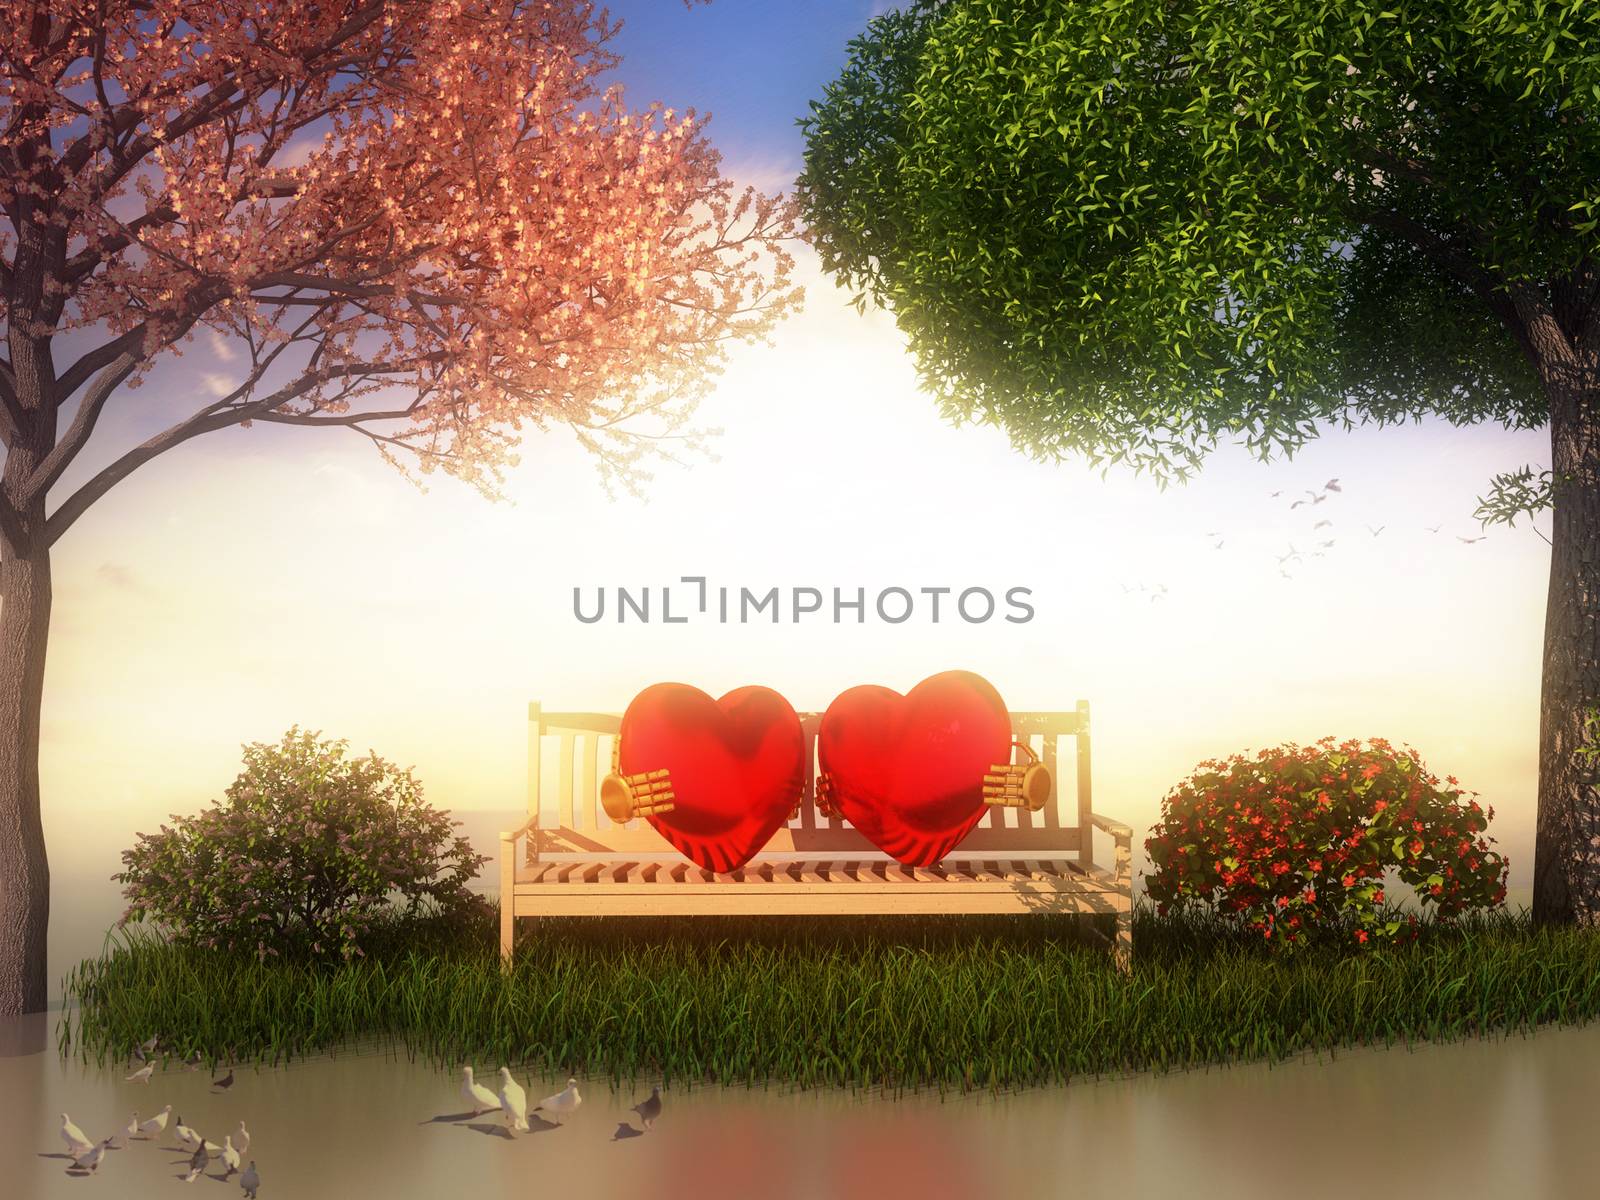 3D Valentin  view for love and romance with heart shape, beautiful summer and spring trees and some birds.